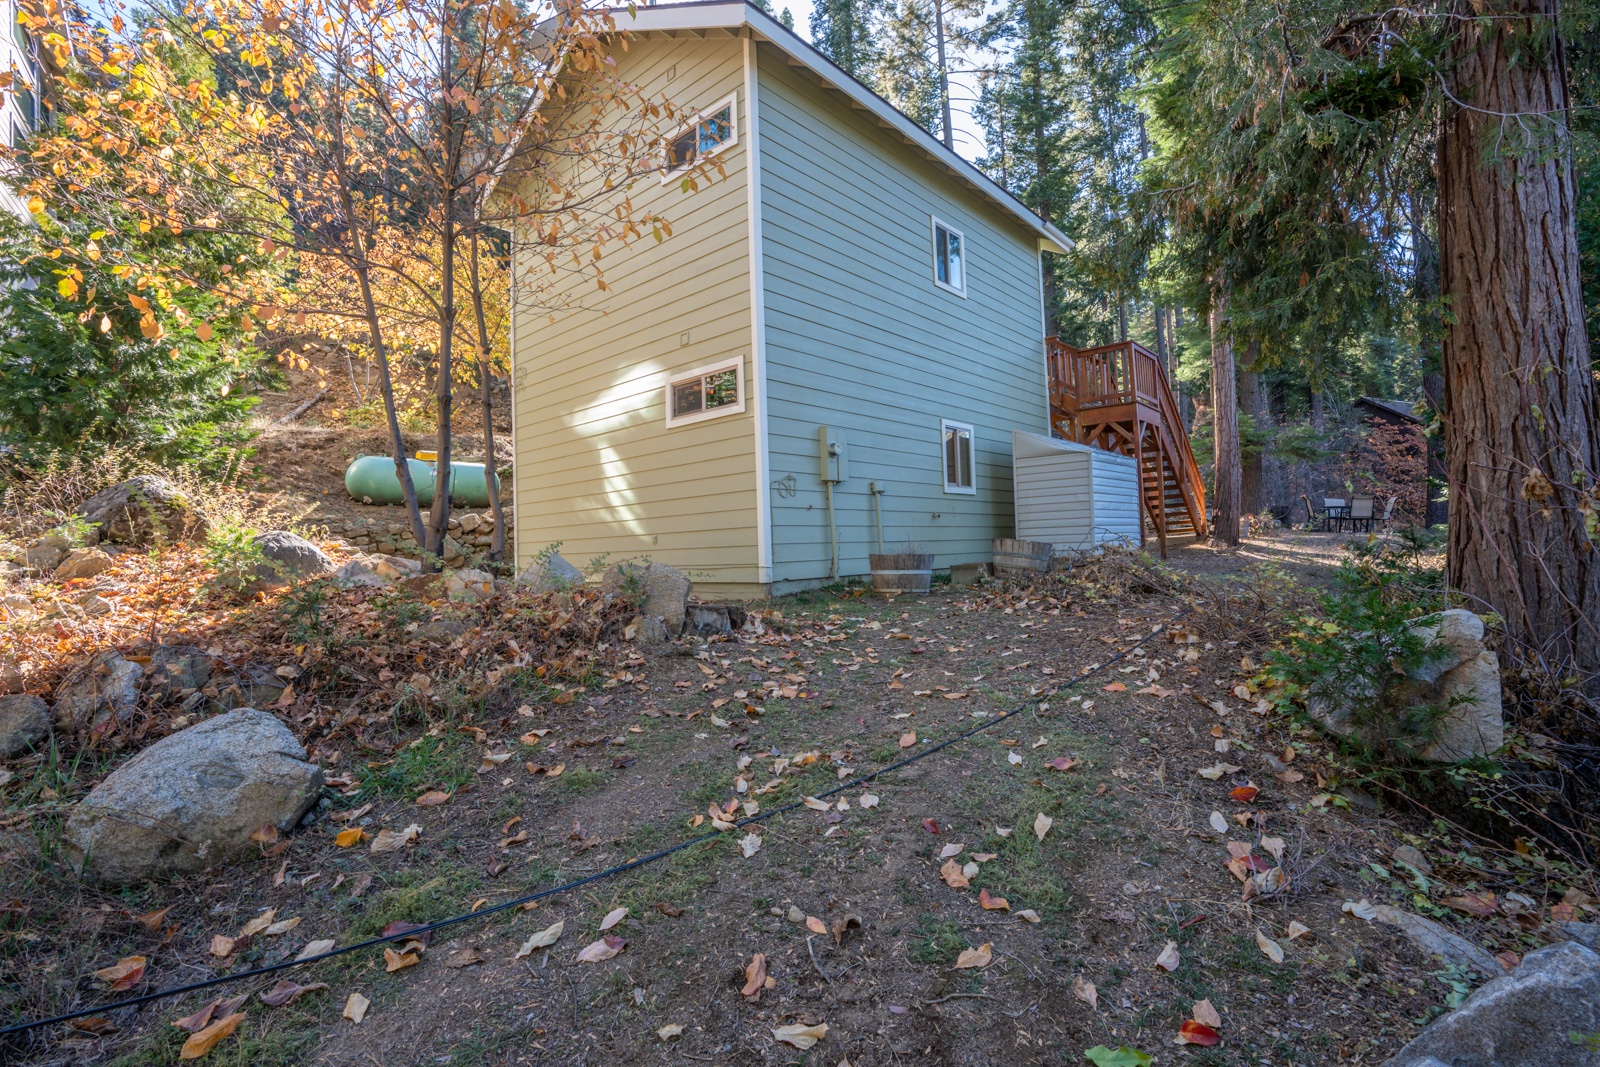 Take in the fresh air & wilderness views in the secluded yard area